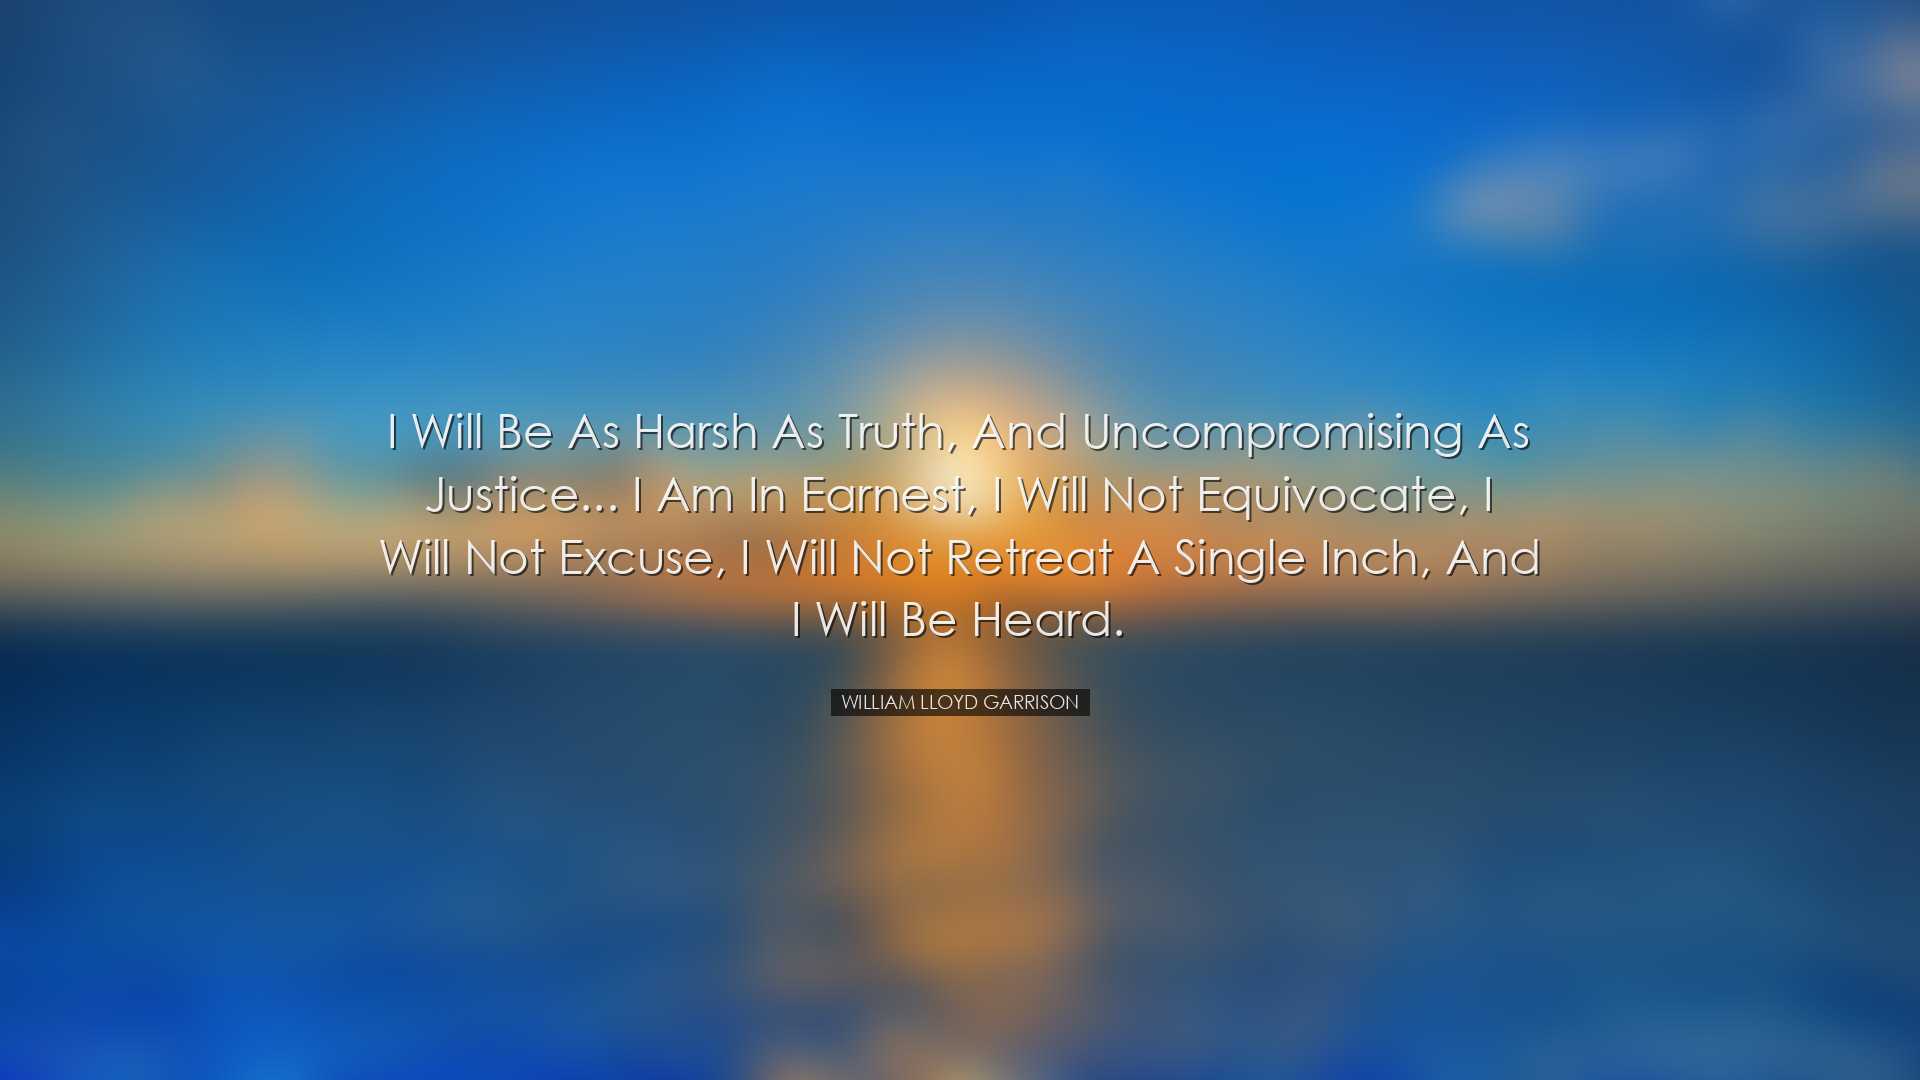 I will be as harsh as truth, and uncompromising as justice... I am